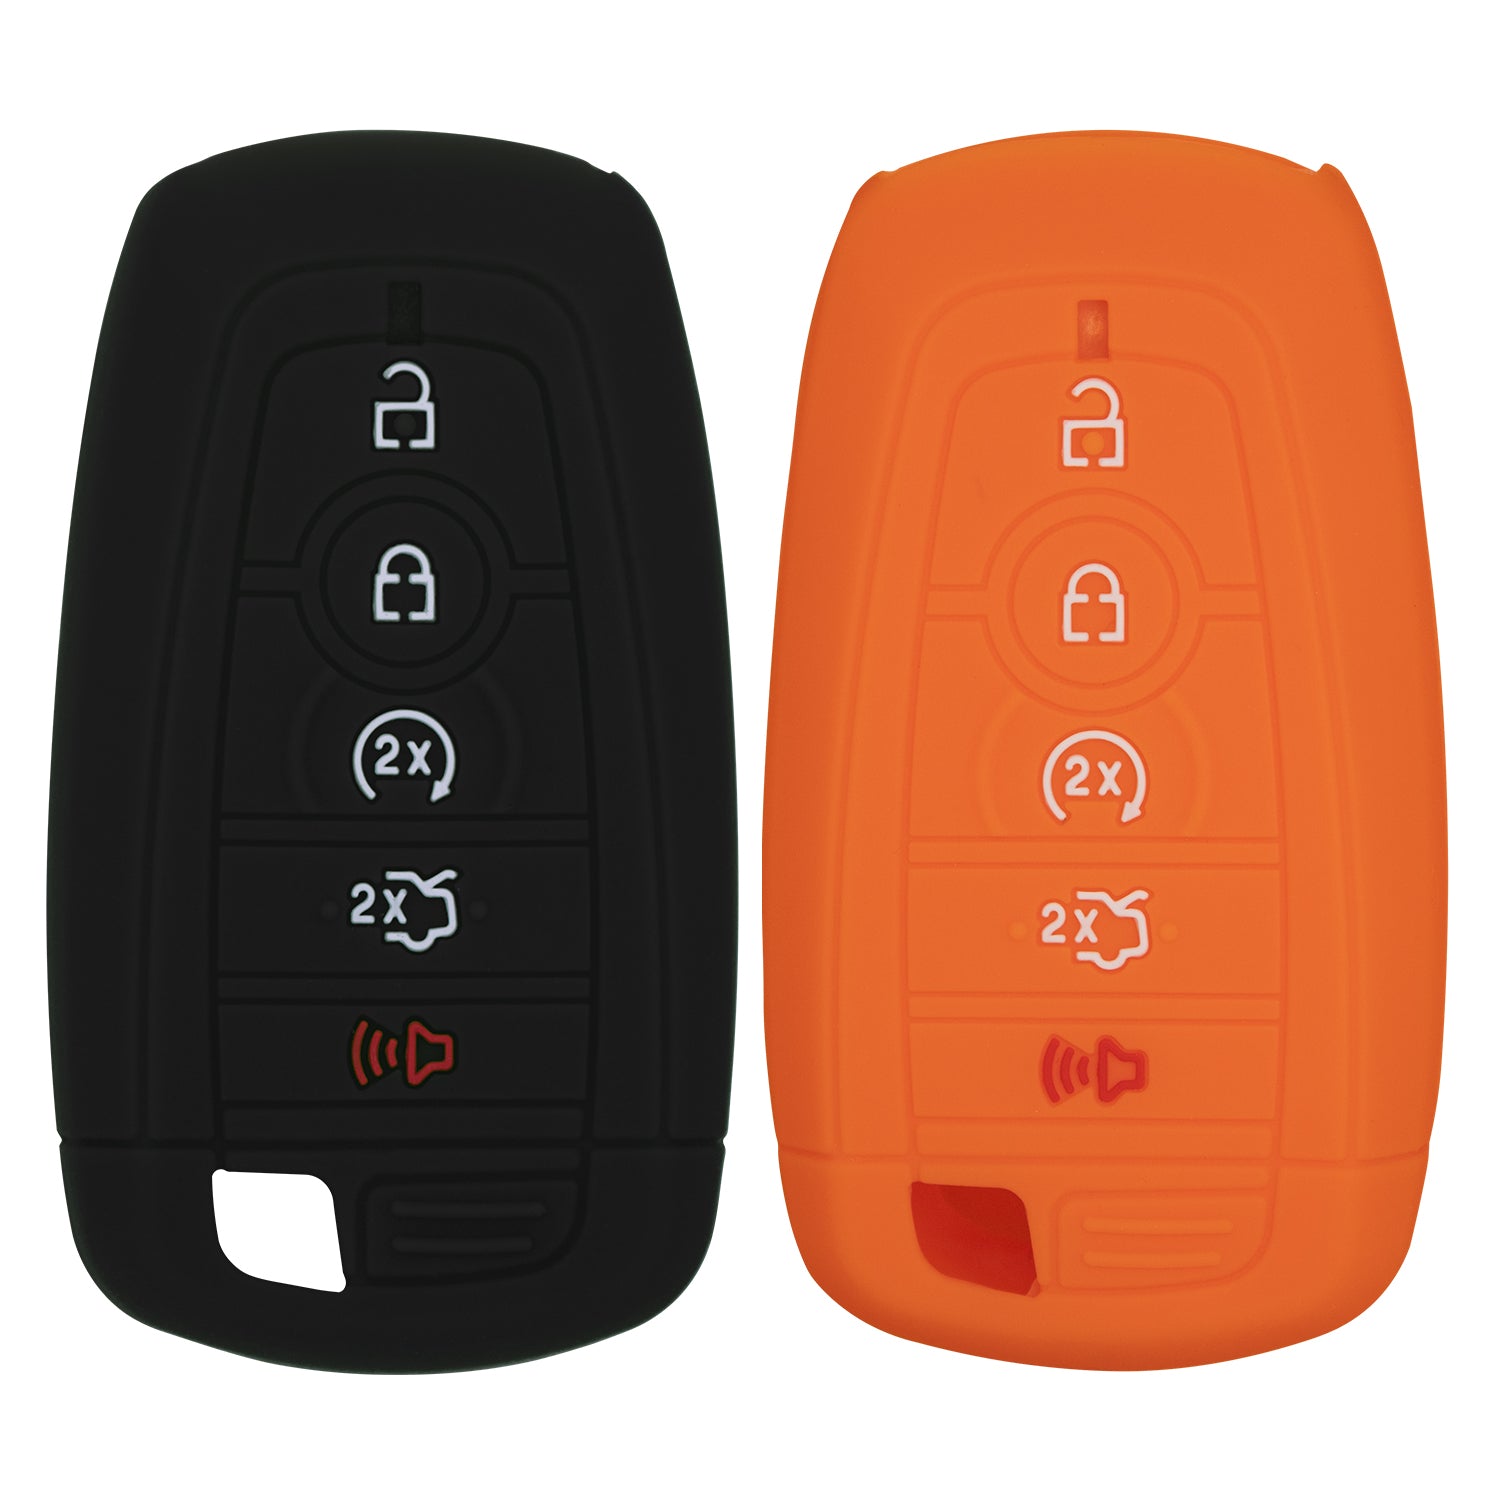 Silicone Case for Smart Key Remote Keyless Entry for Ford Fusion Explorer Edge Mustang Expedition M3N-A2C93142600 164-R8149 164R8149 R8149 (Black & Orange)